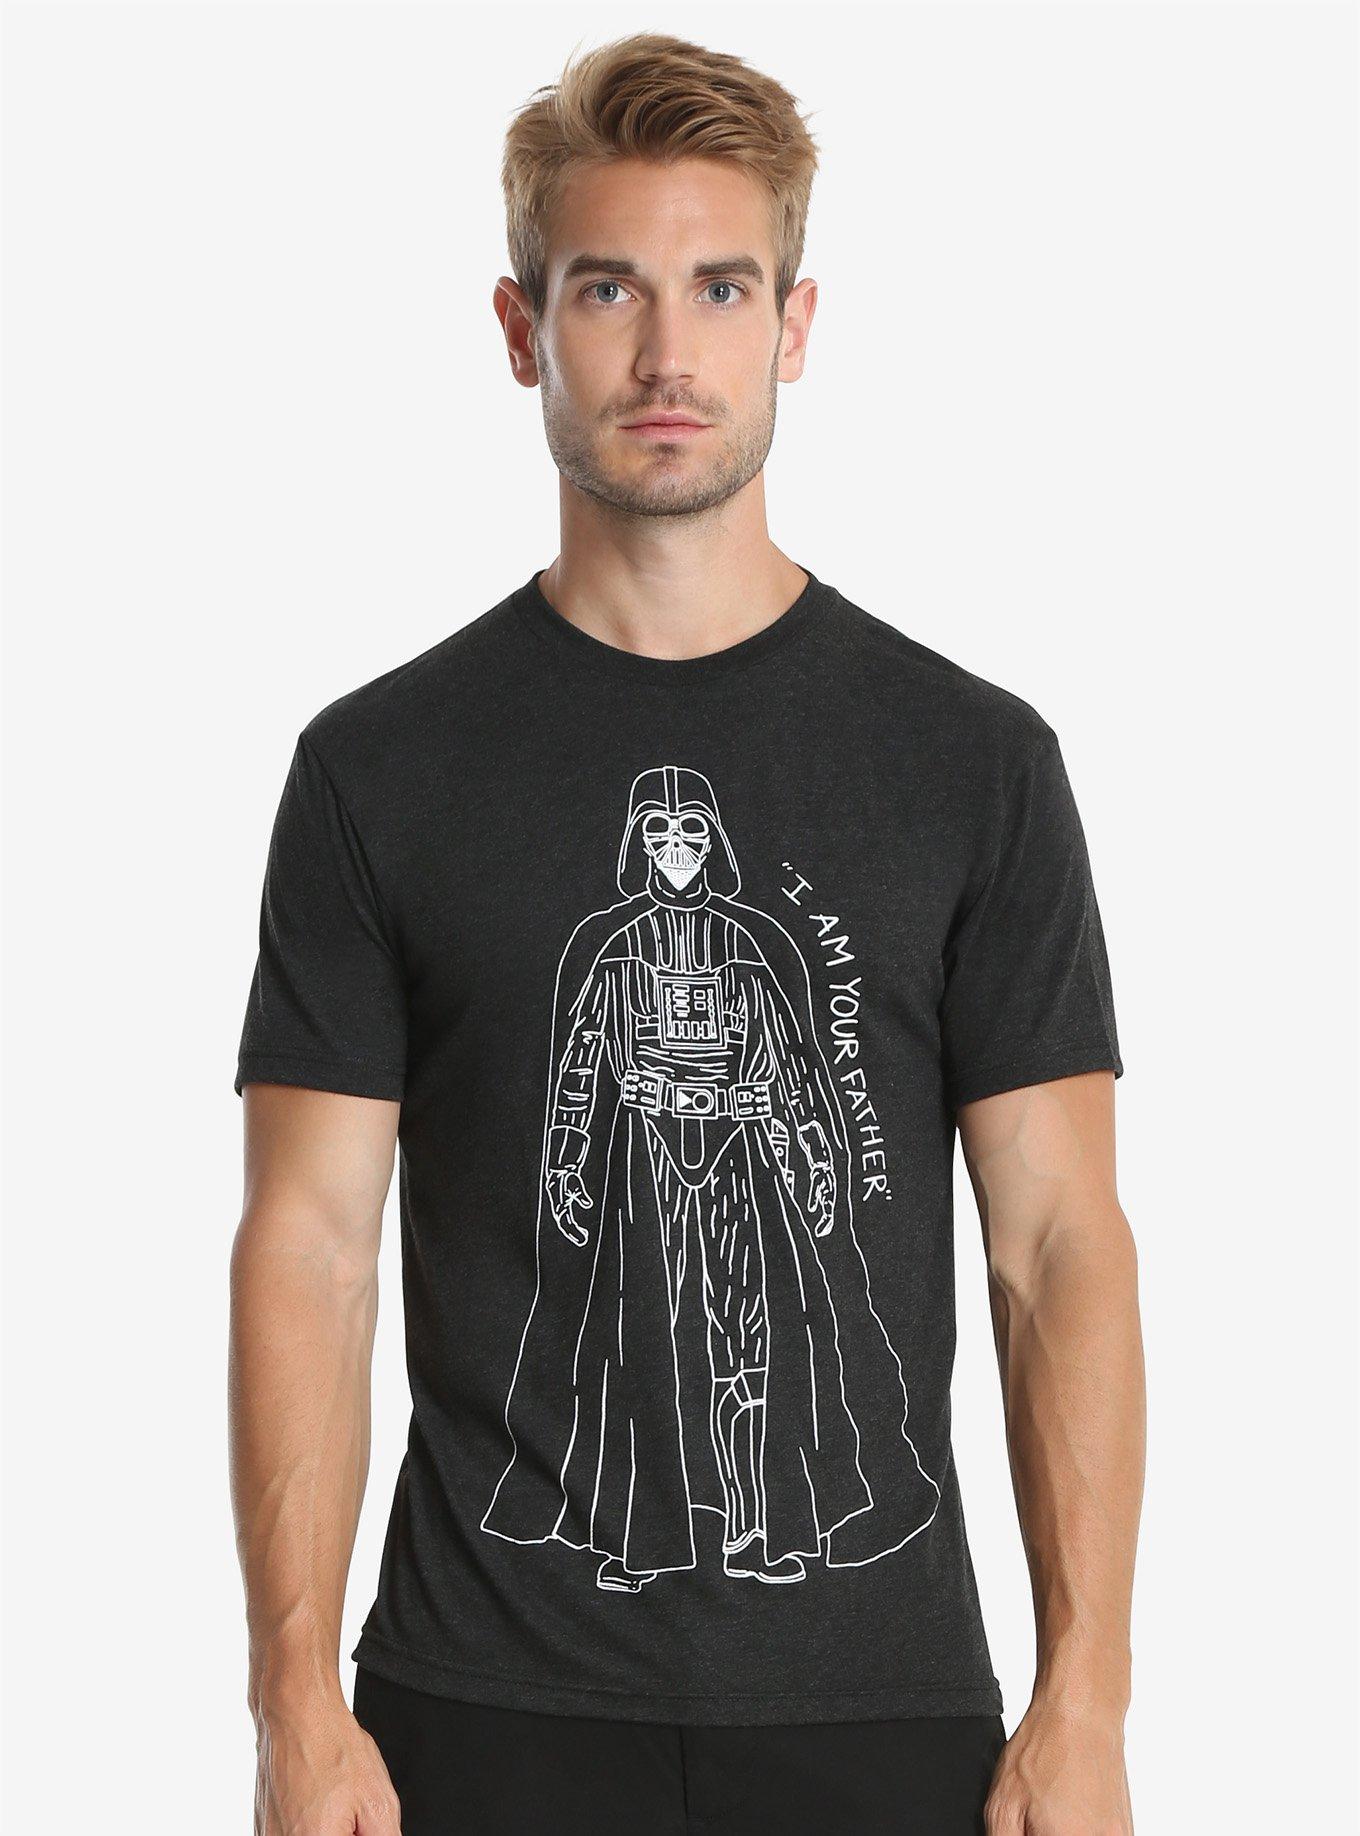 Darth Vader who's your daddy T-shirt, hoodie, sweater, long sleeve